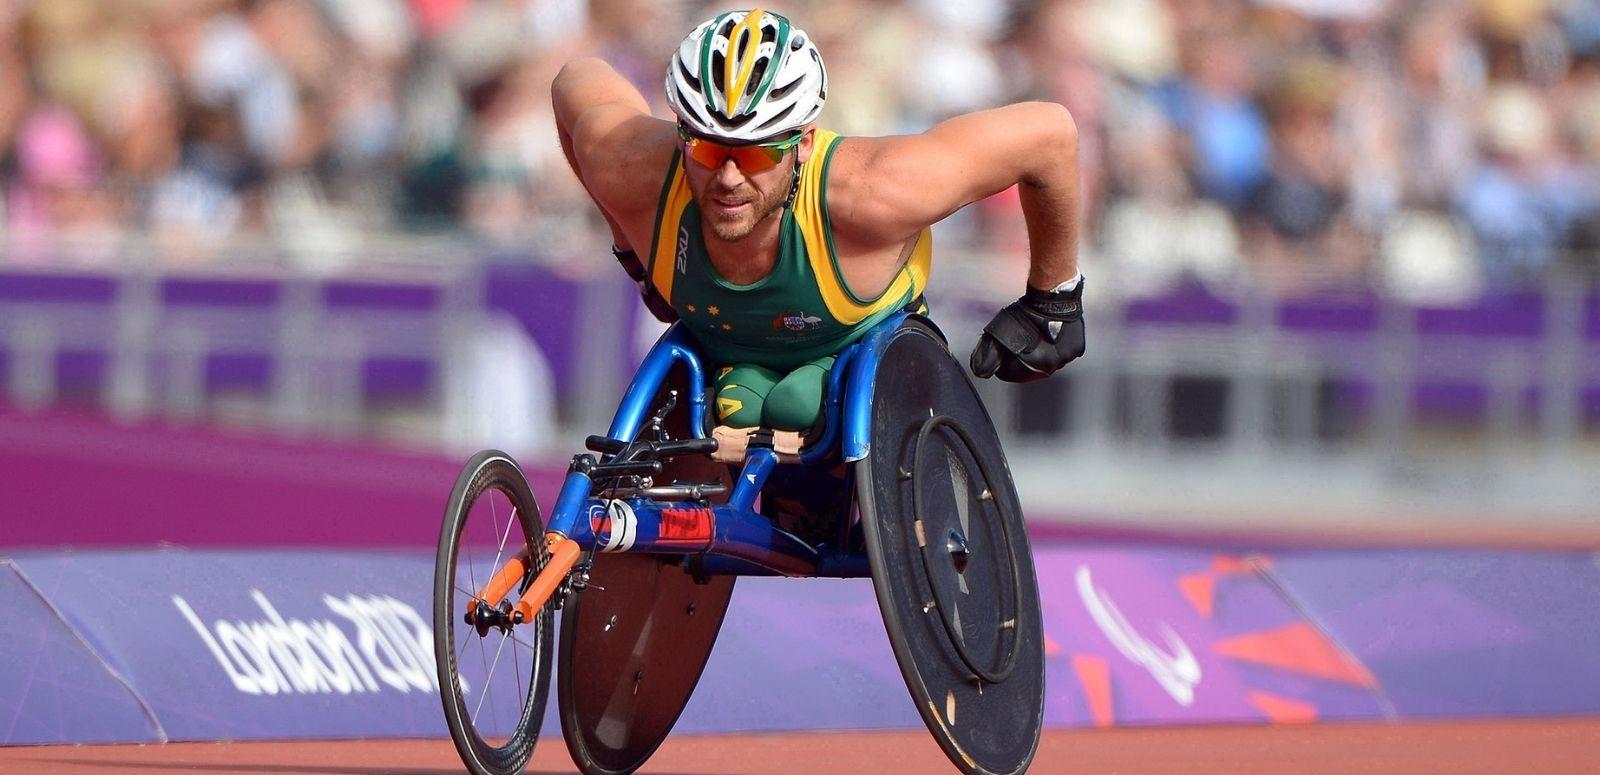 Wheelchair racer Kurt Fearnley is captured racing at the London 2012 Paralympics. A packed stadium is blurred behind him.